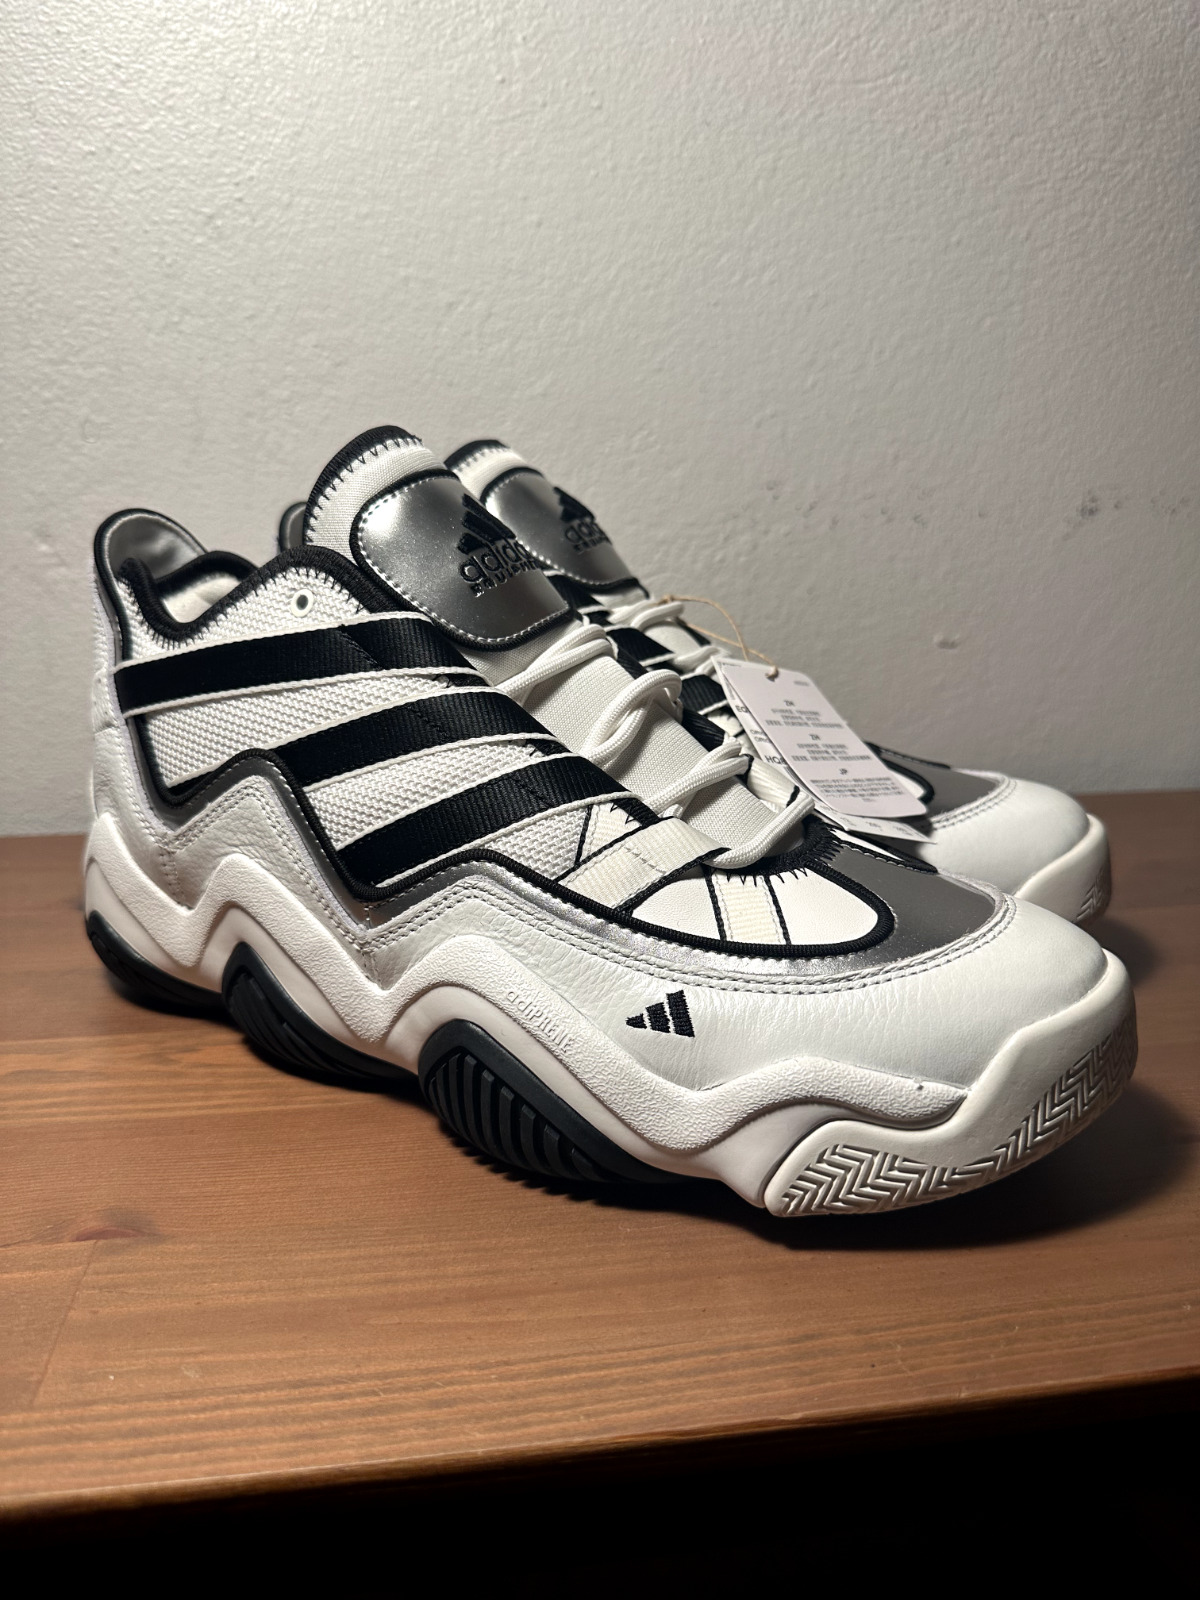 Clever Adidas KOBE EQT Top Ten 2010 W Basketball Shoes HQ8757 White Black New Size 10.5 on eBay